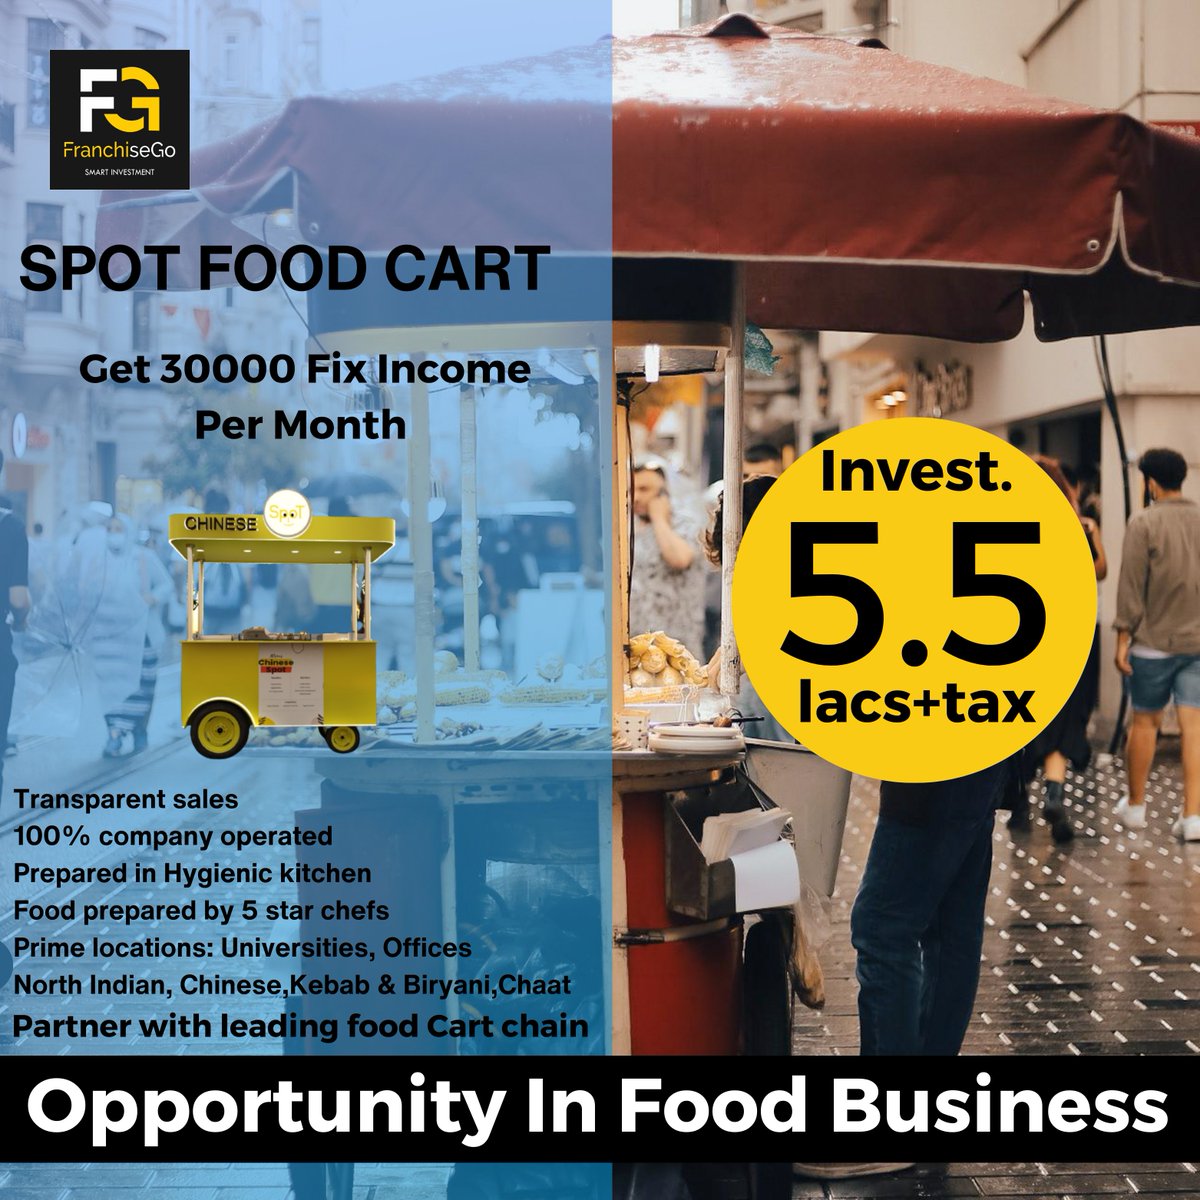 #franchise #Franchisego #franchiseopportunities #lowinvestmentbusiness #alltimebusiness #businessopportunities

#business #investment #opportunities #india